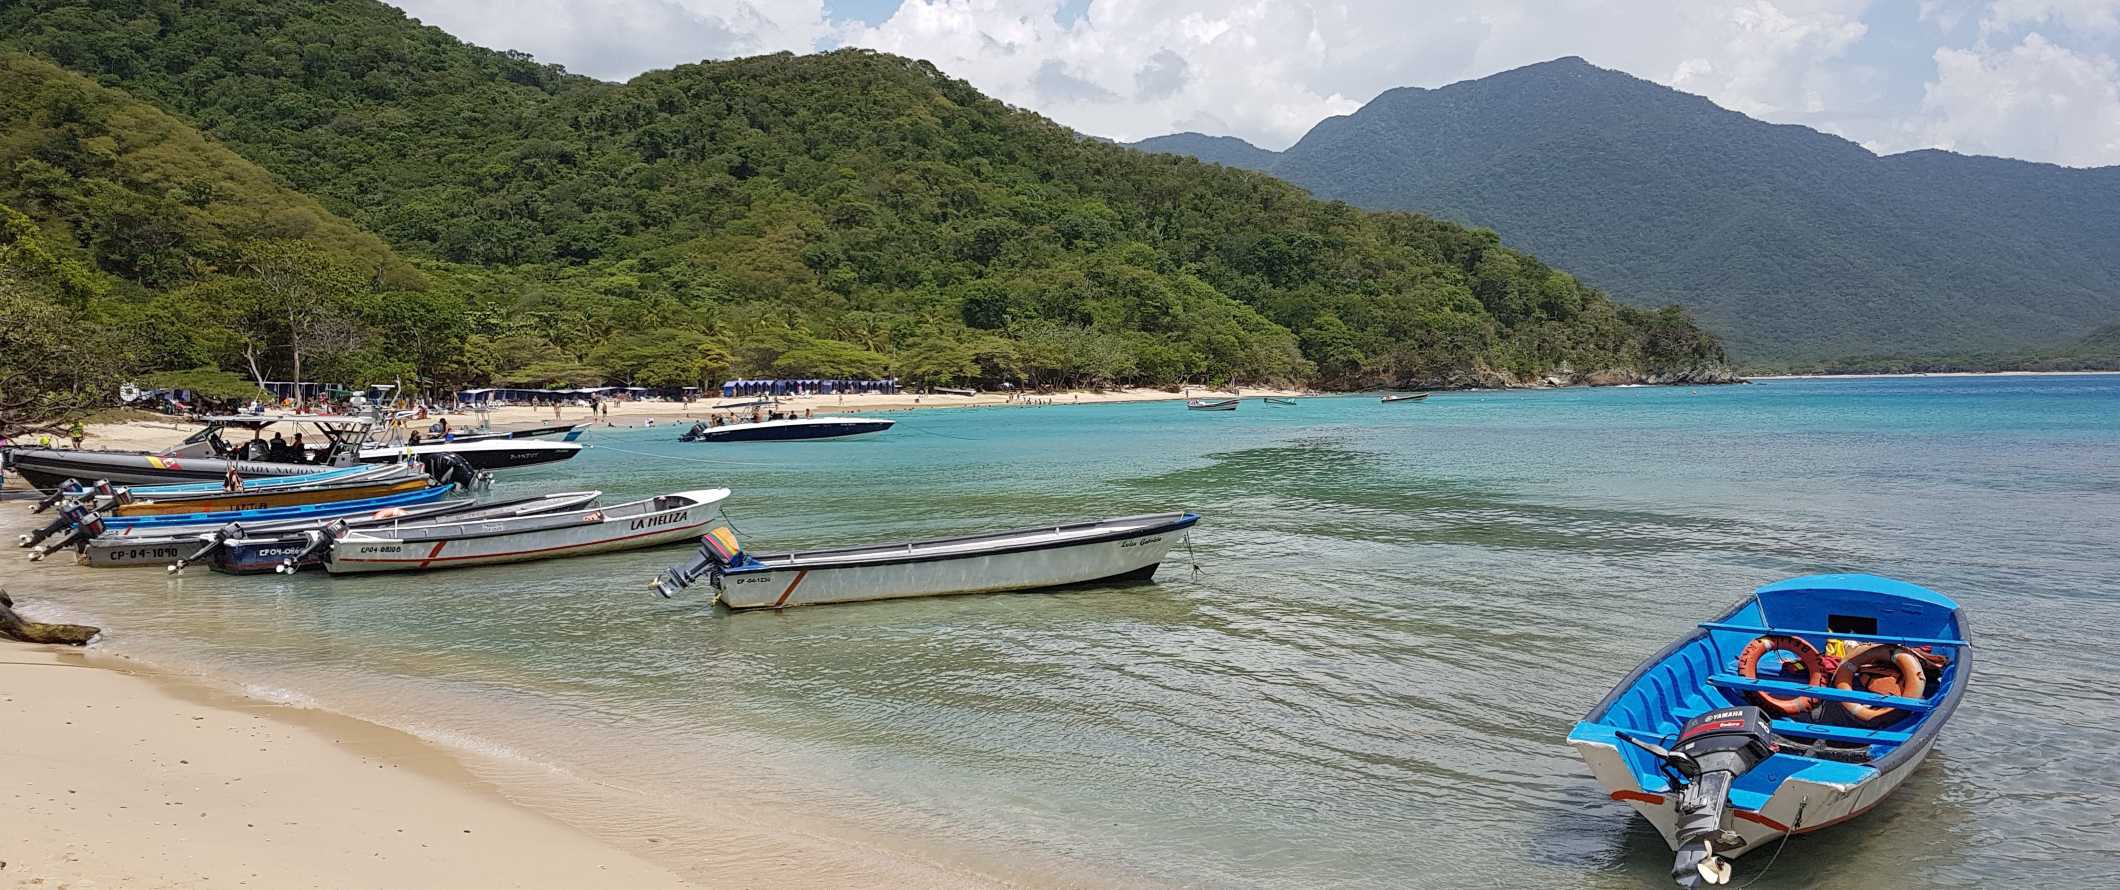 Small boats pulled up on a beach in Parque Tayrona, a national park in Colombia